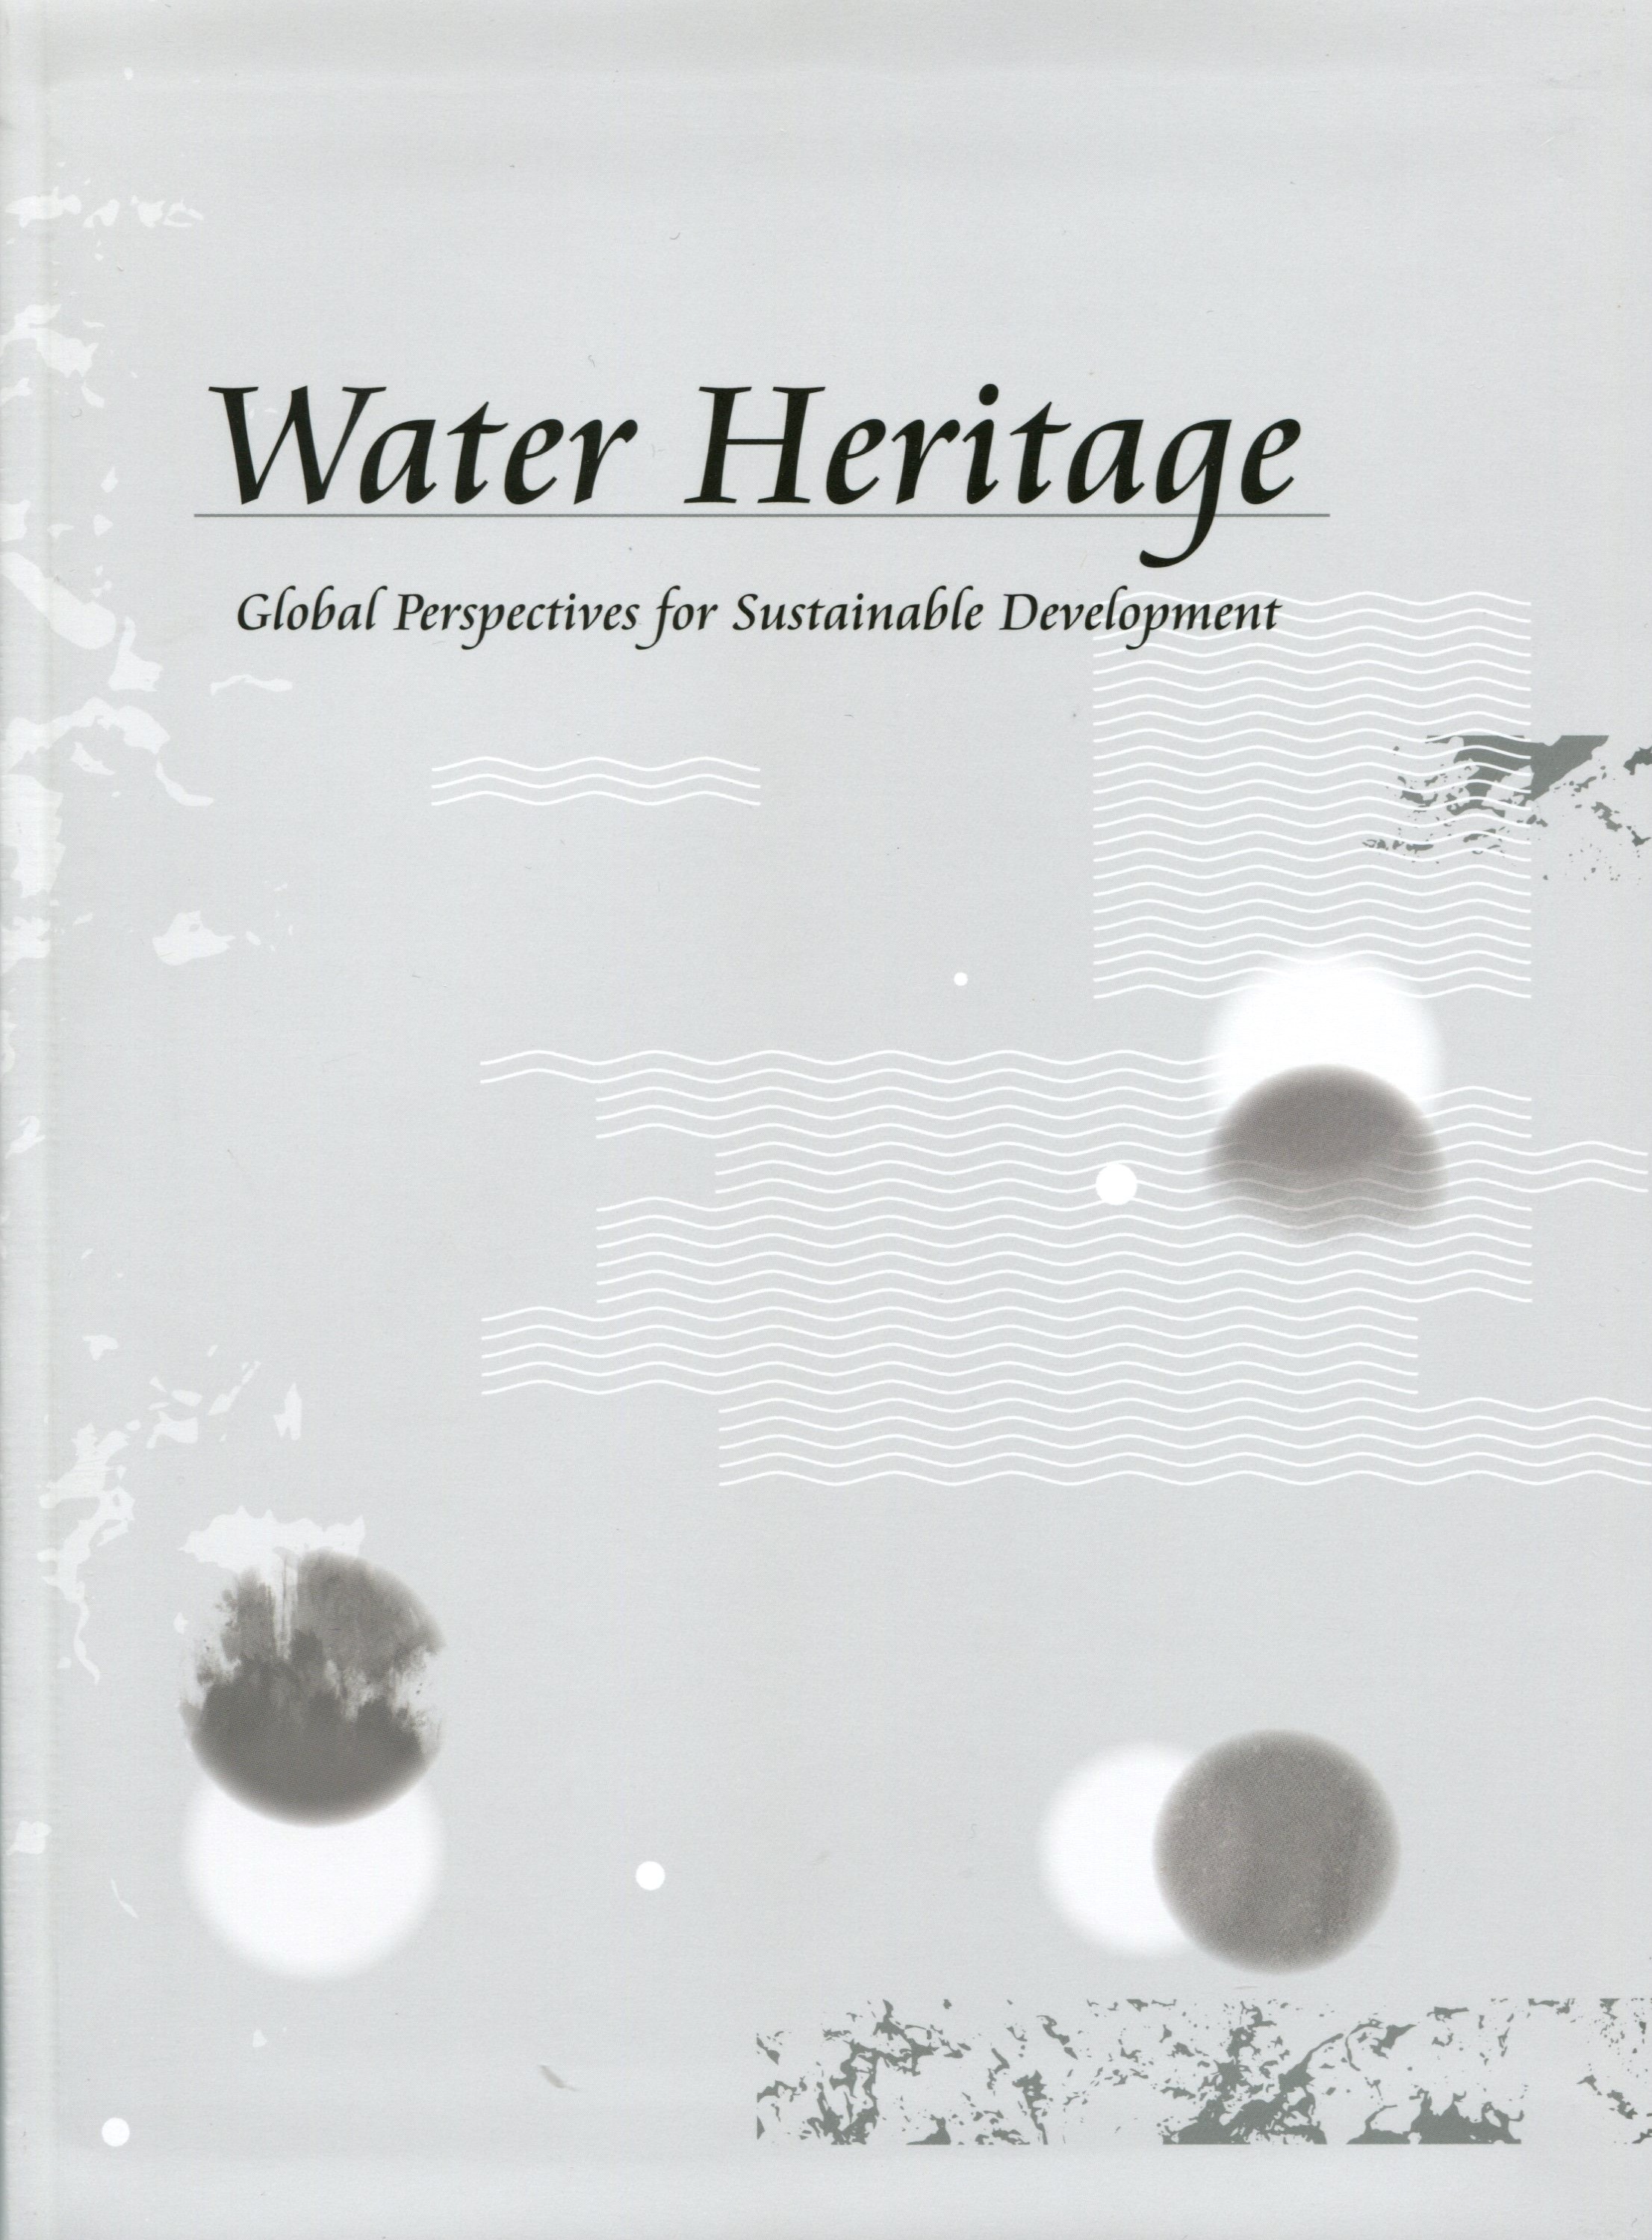 Water Heritage – Global Perspectives for Sustainable Development